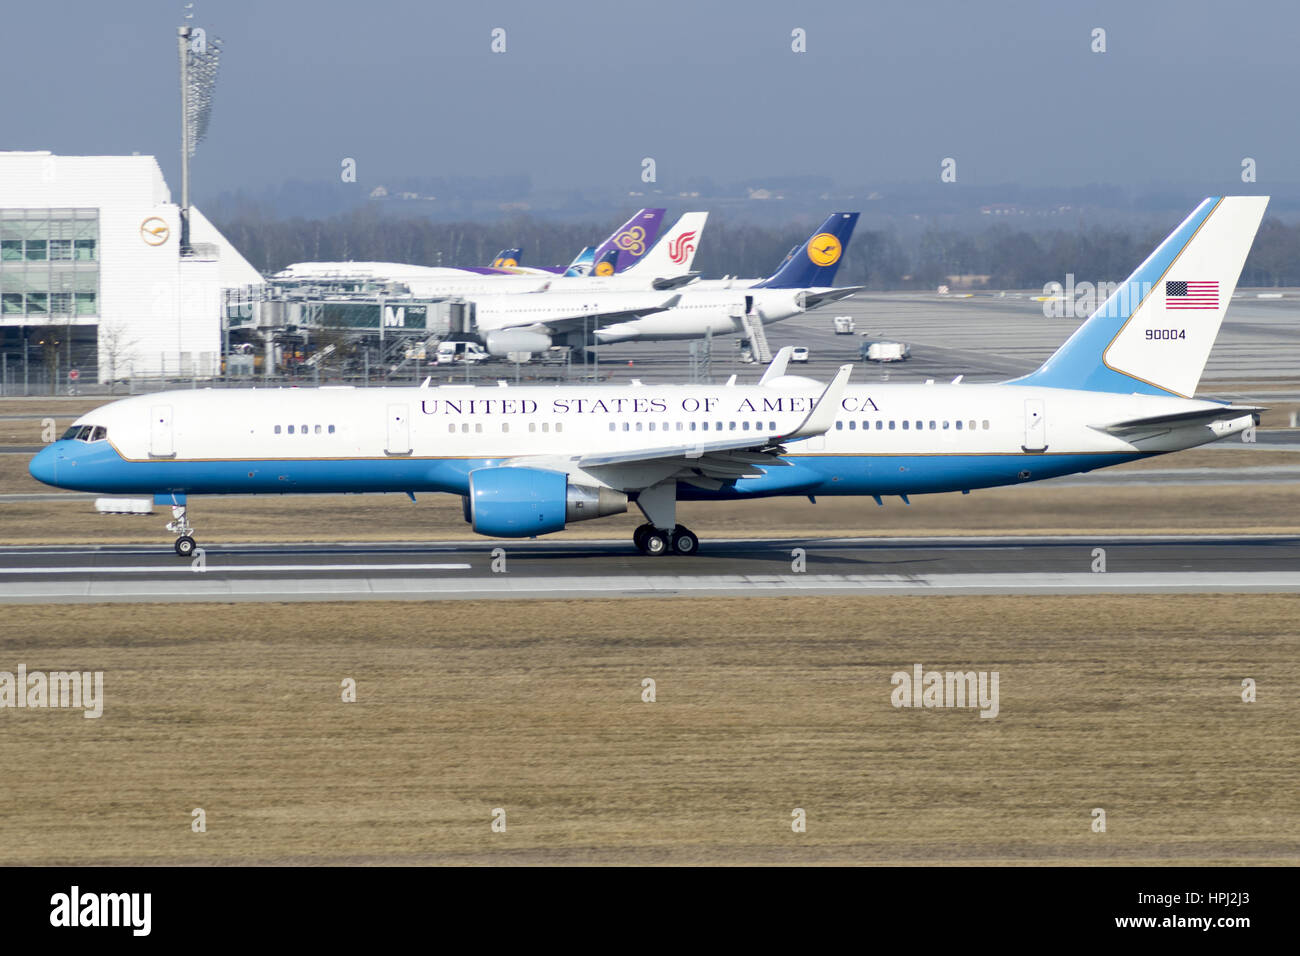 99-0004 United Stated of Amerika plane is landing at Munich Airport Stock Photo